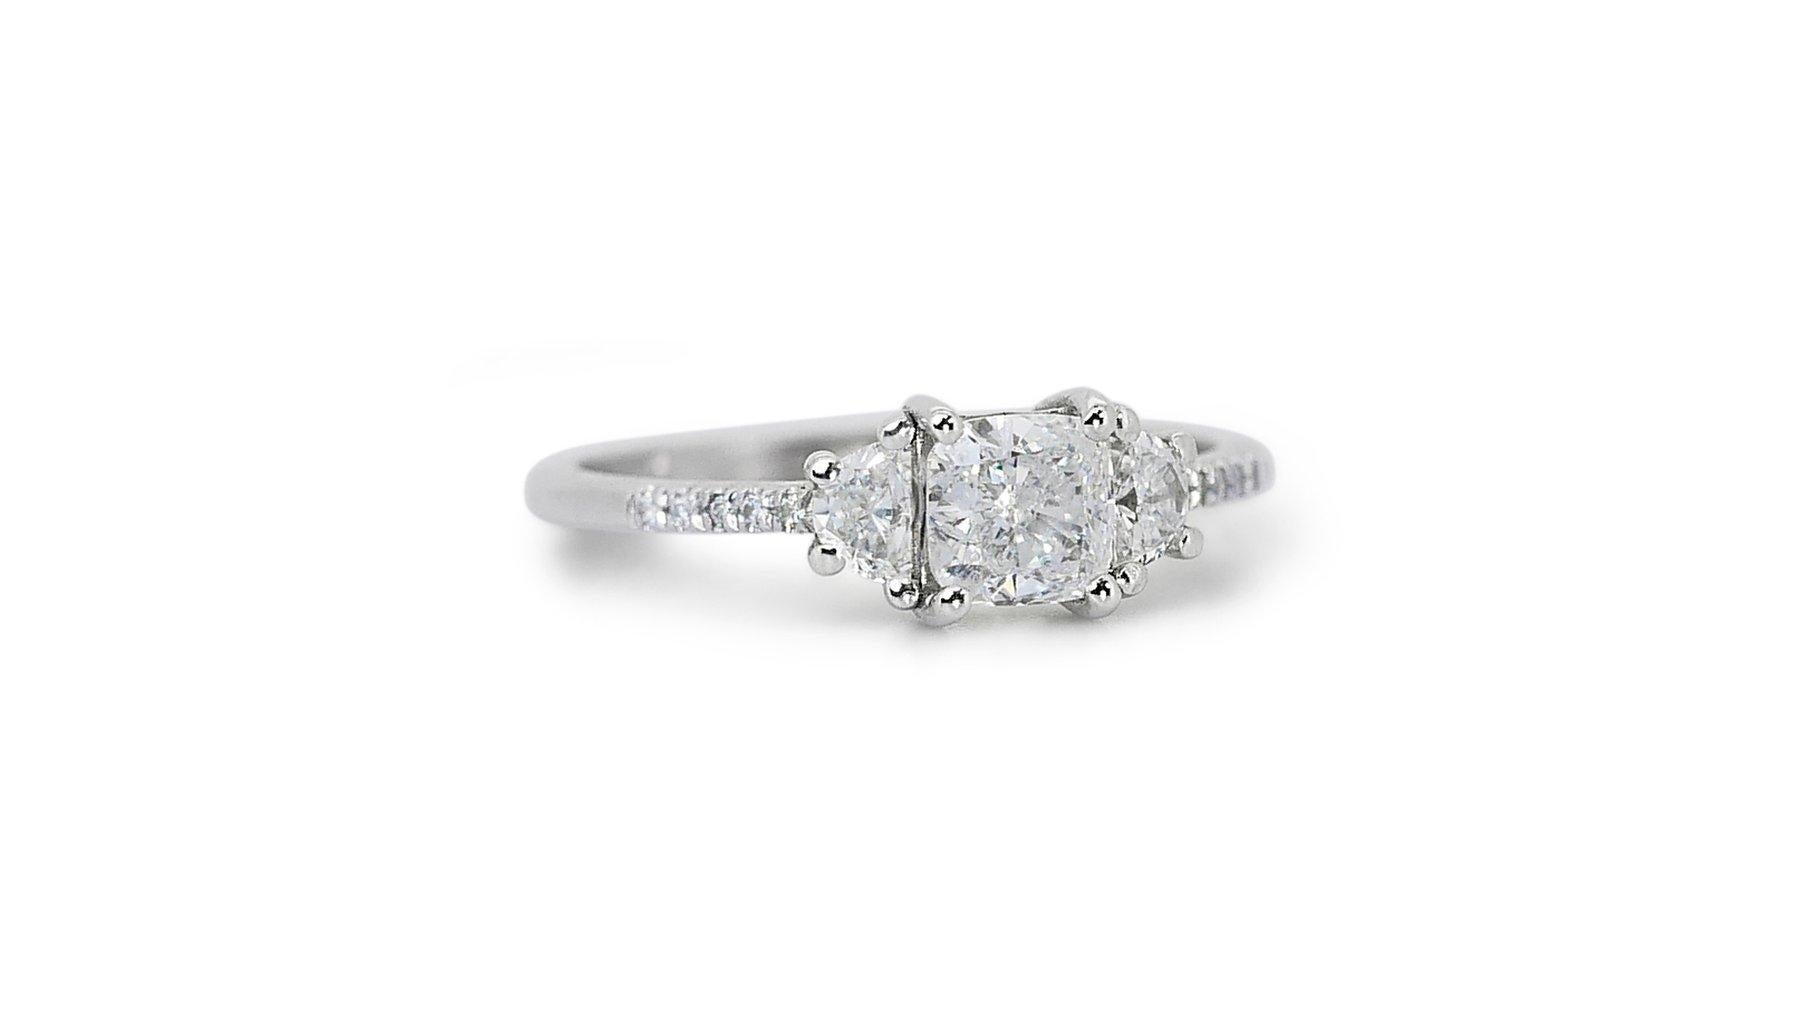 Captivating 18K White Gold Natural Diamond Halo Ring w/1.31 Carat

Presenting our captivating diamond halo ring featuring a stunning 1.01 carat center stone.  The center stone is beautifully complemented by a sparkling halo of two half moon diamonds